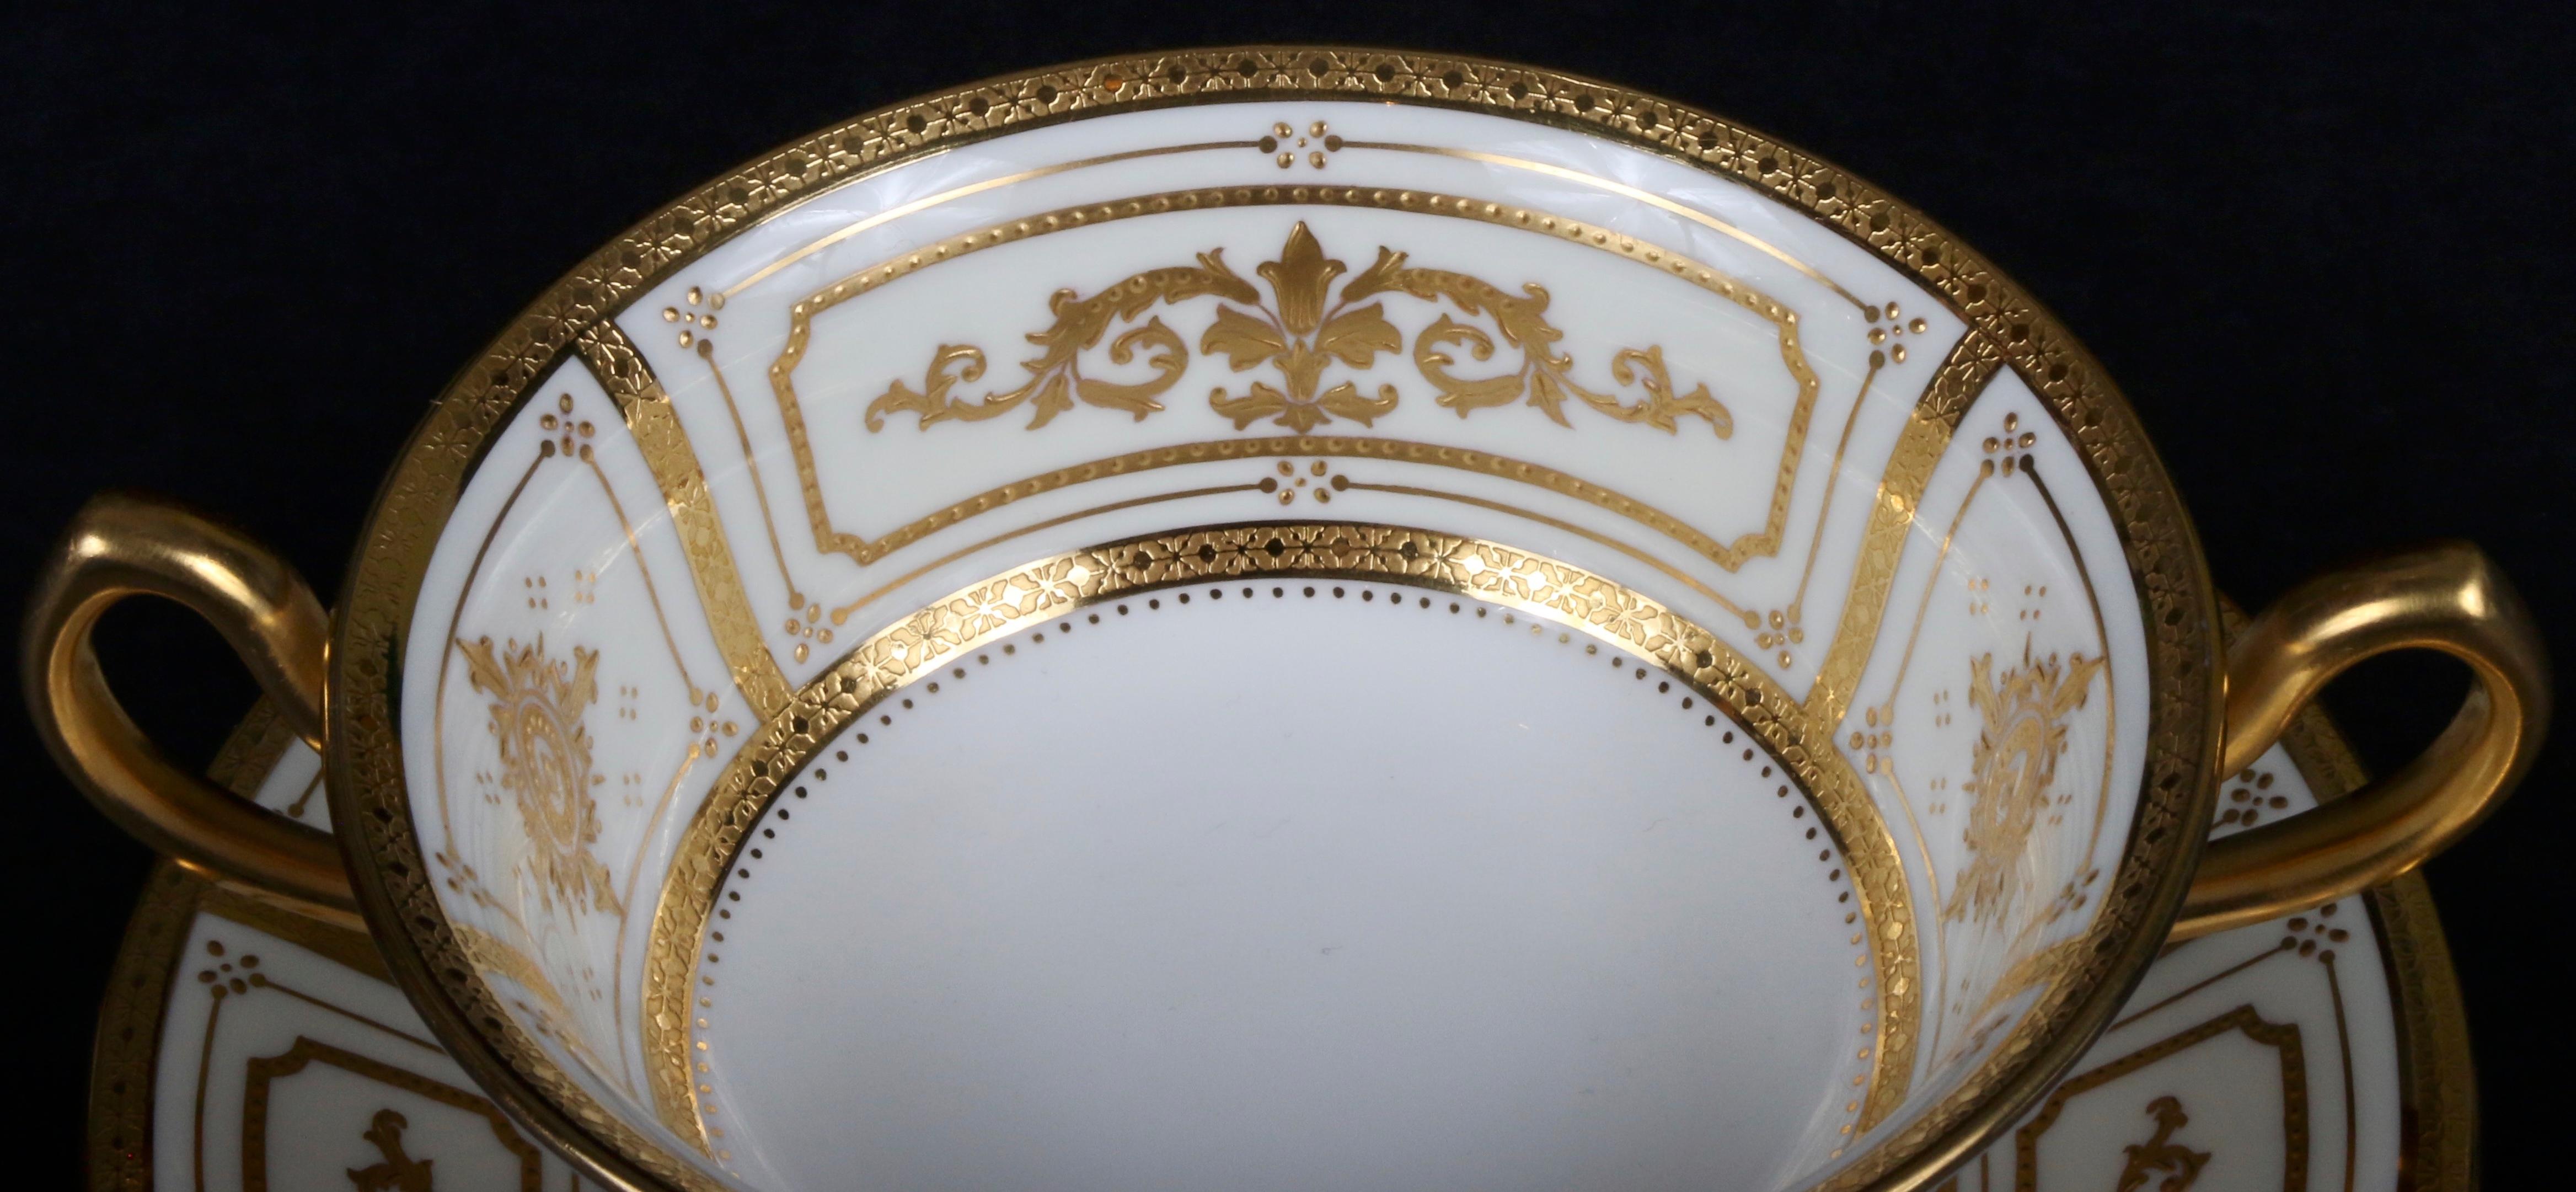 Complete Service for 12 of Minton for Tiffany Neoclassical Style Gilded Plates For Sale 4